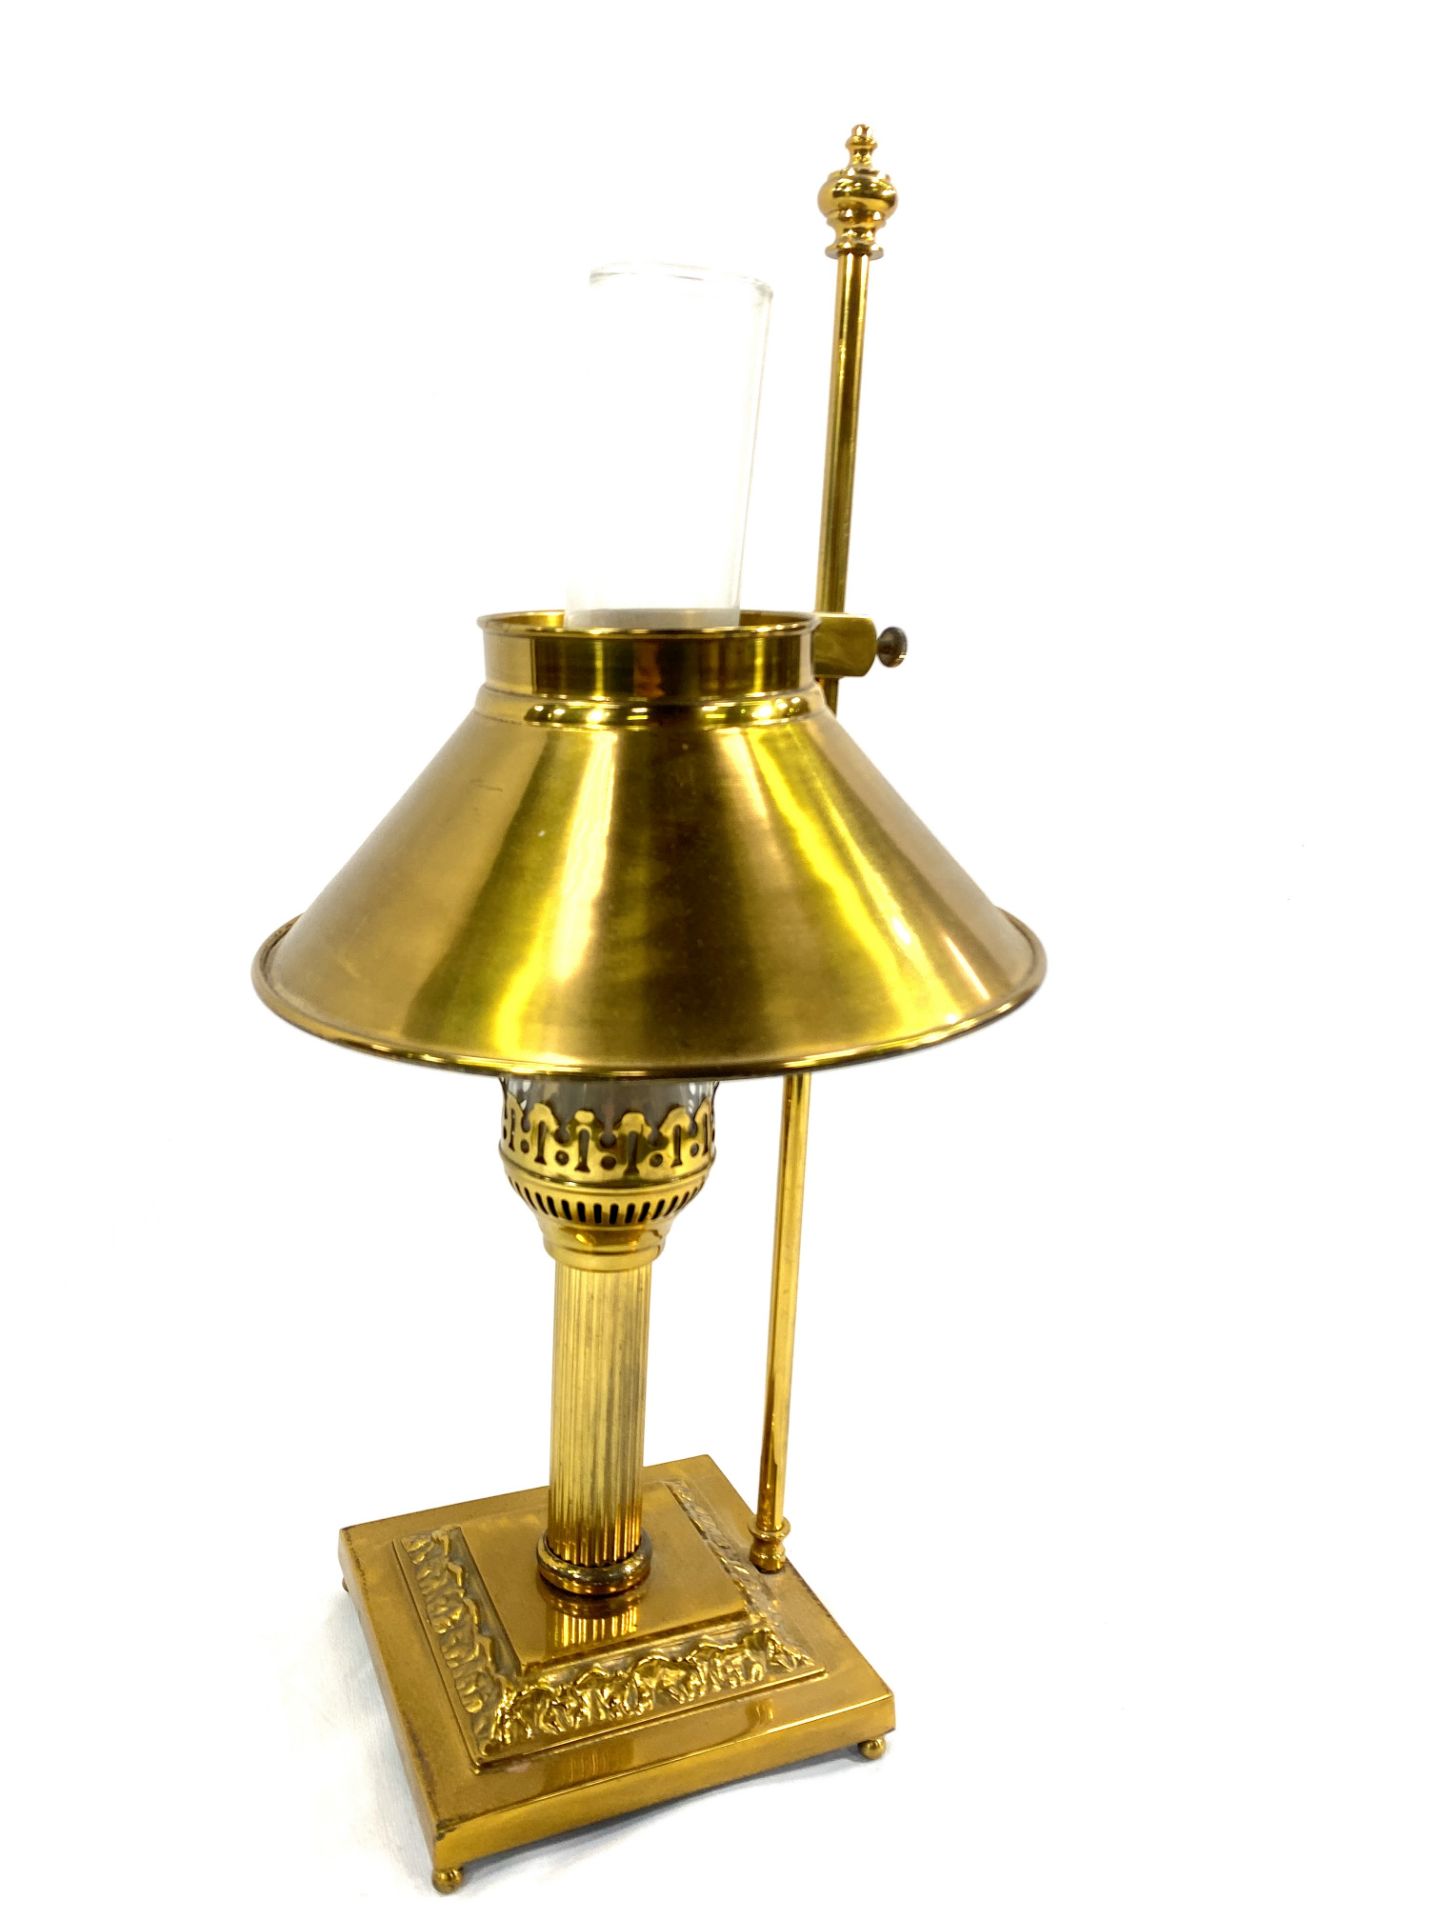 Brass table lamp in the style of a gas lamp - Image 2 of 3